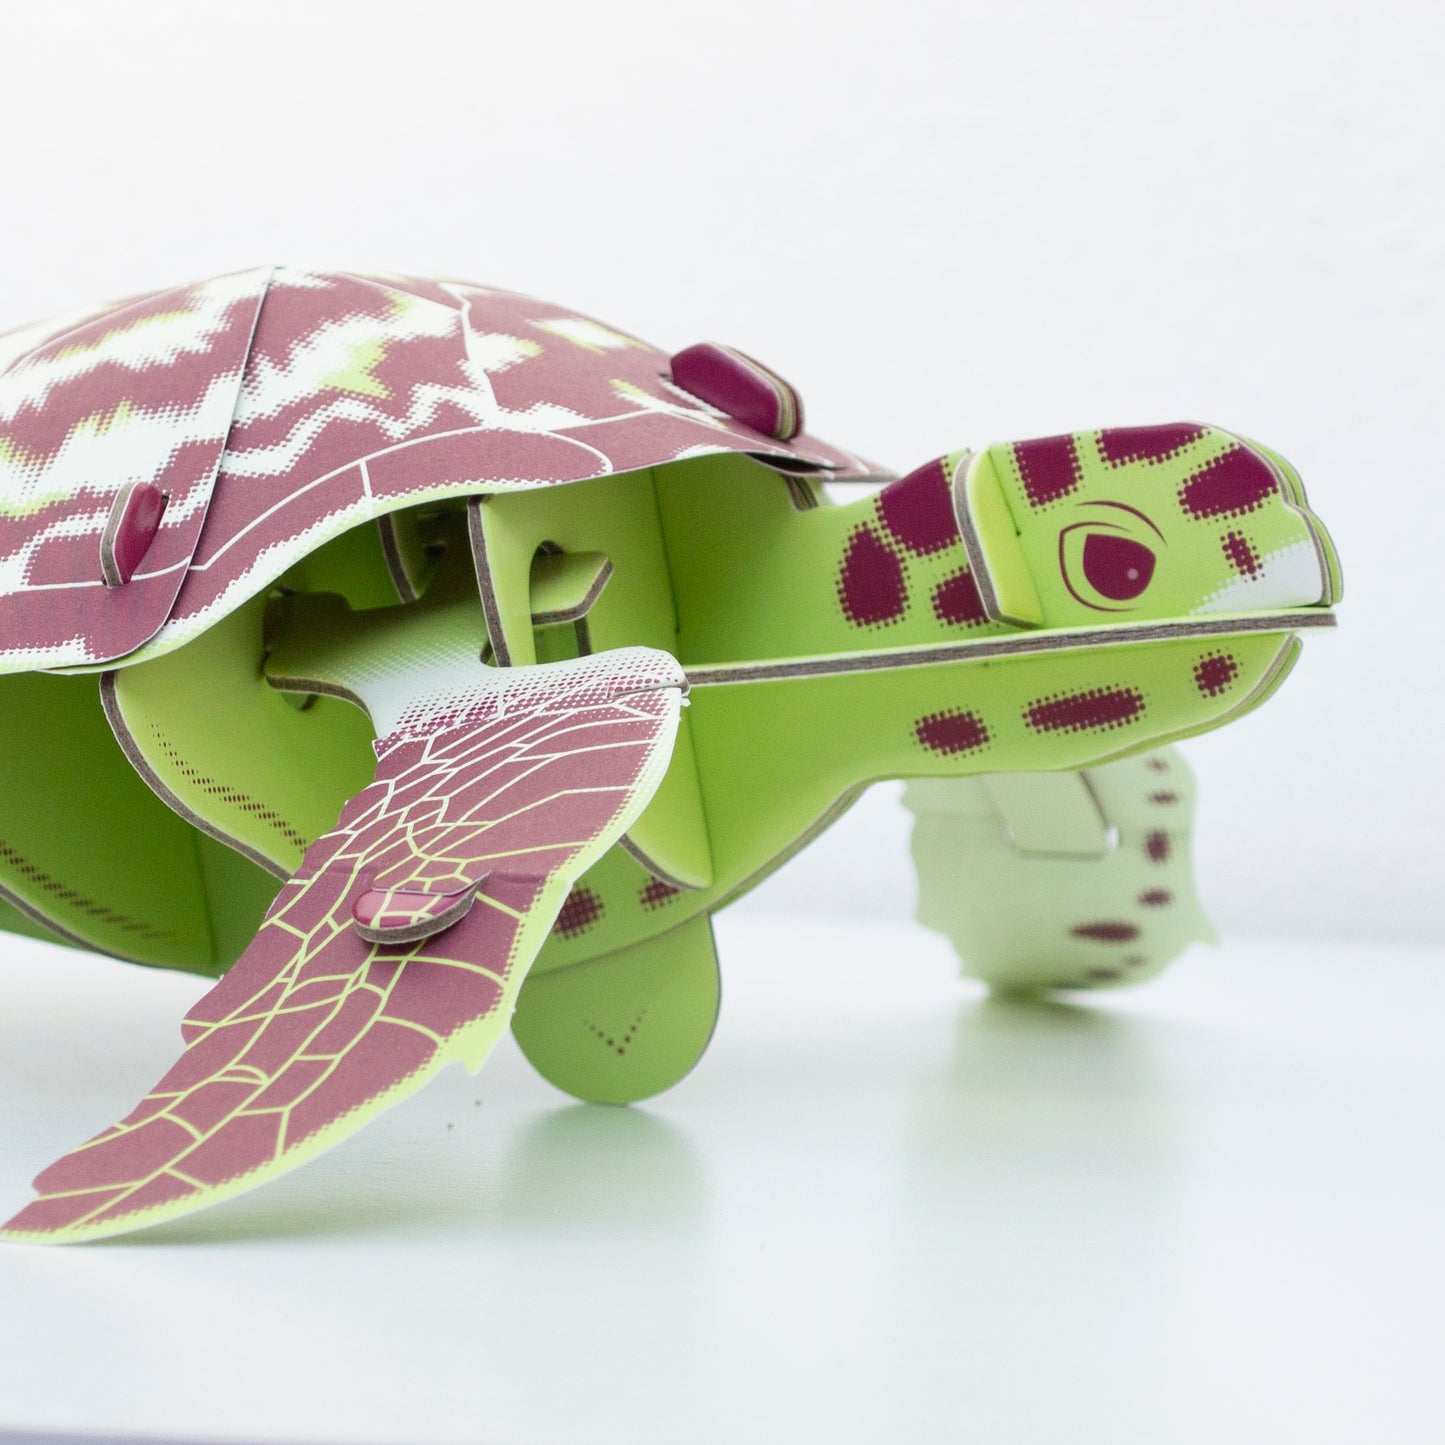 BUILD YOUR OWN KIT - HAWKSBILL TURTLE